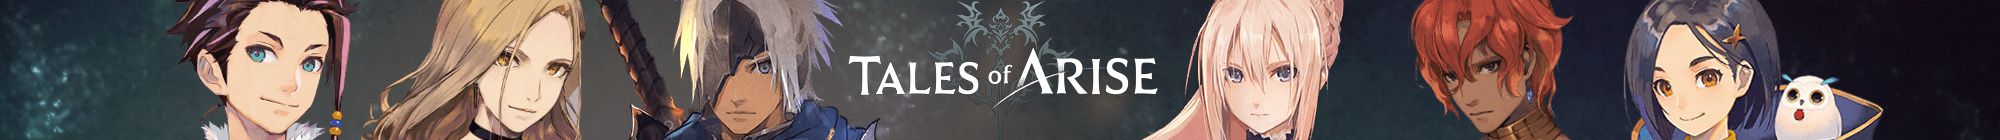 tales-of-arise-banner